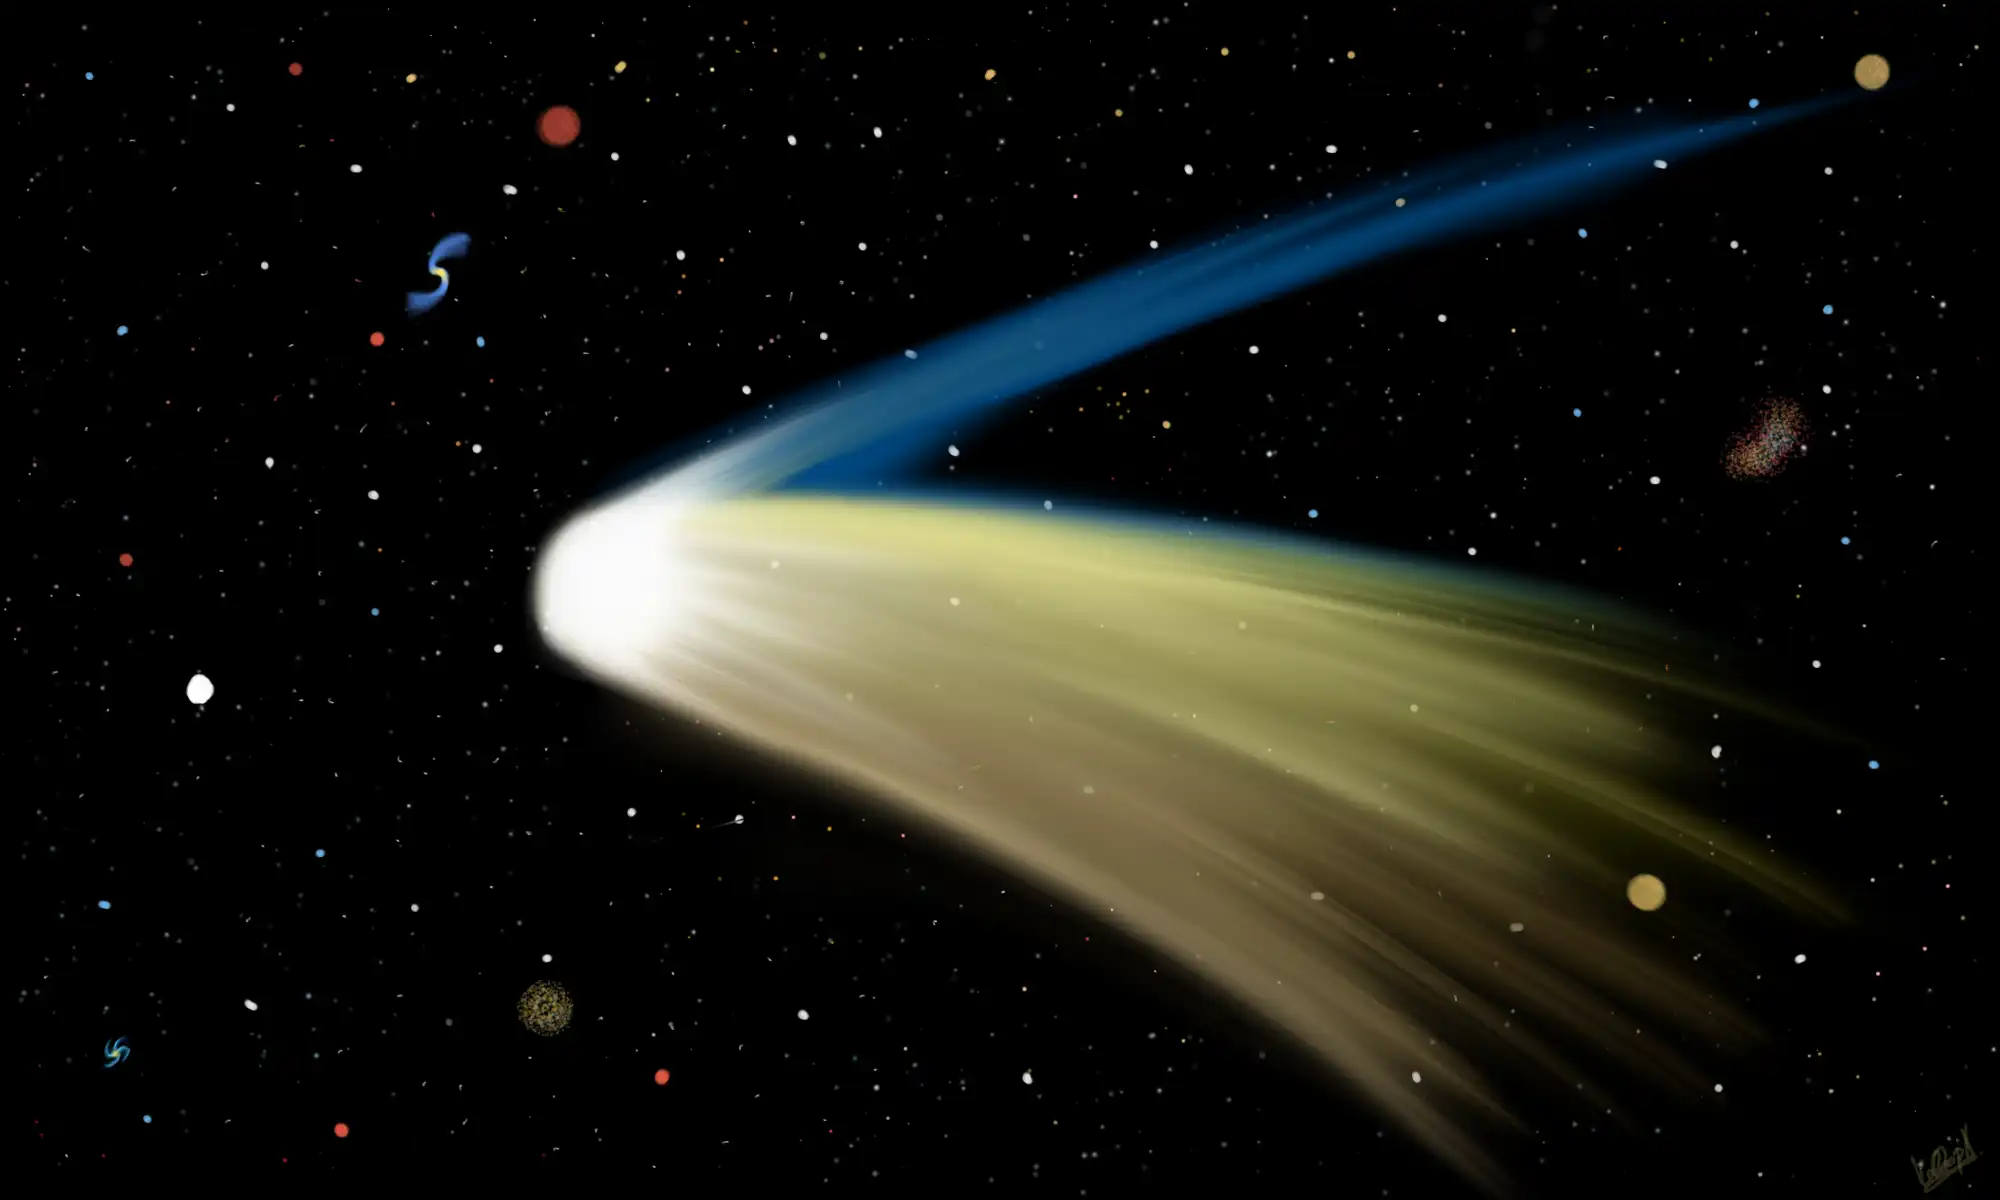 Drawing of a comet